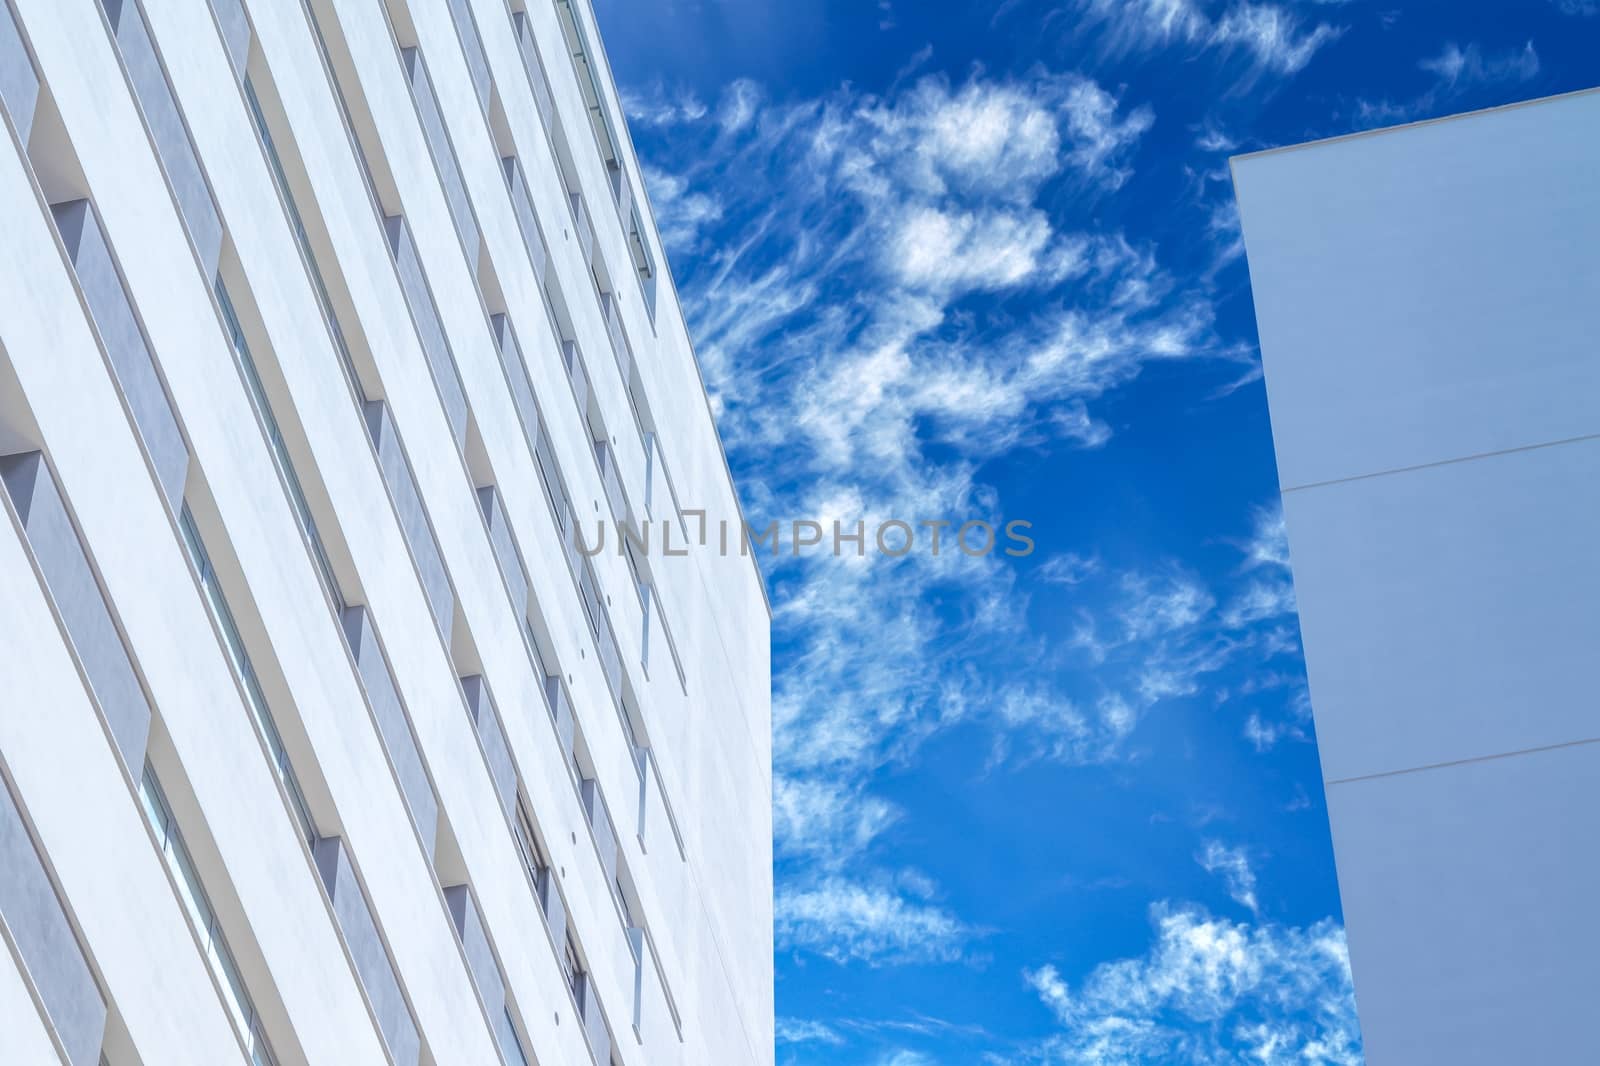 skyscrapers under blue sky with white clouds